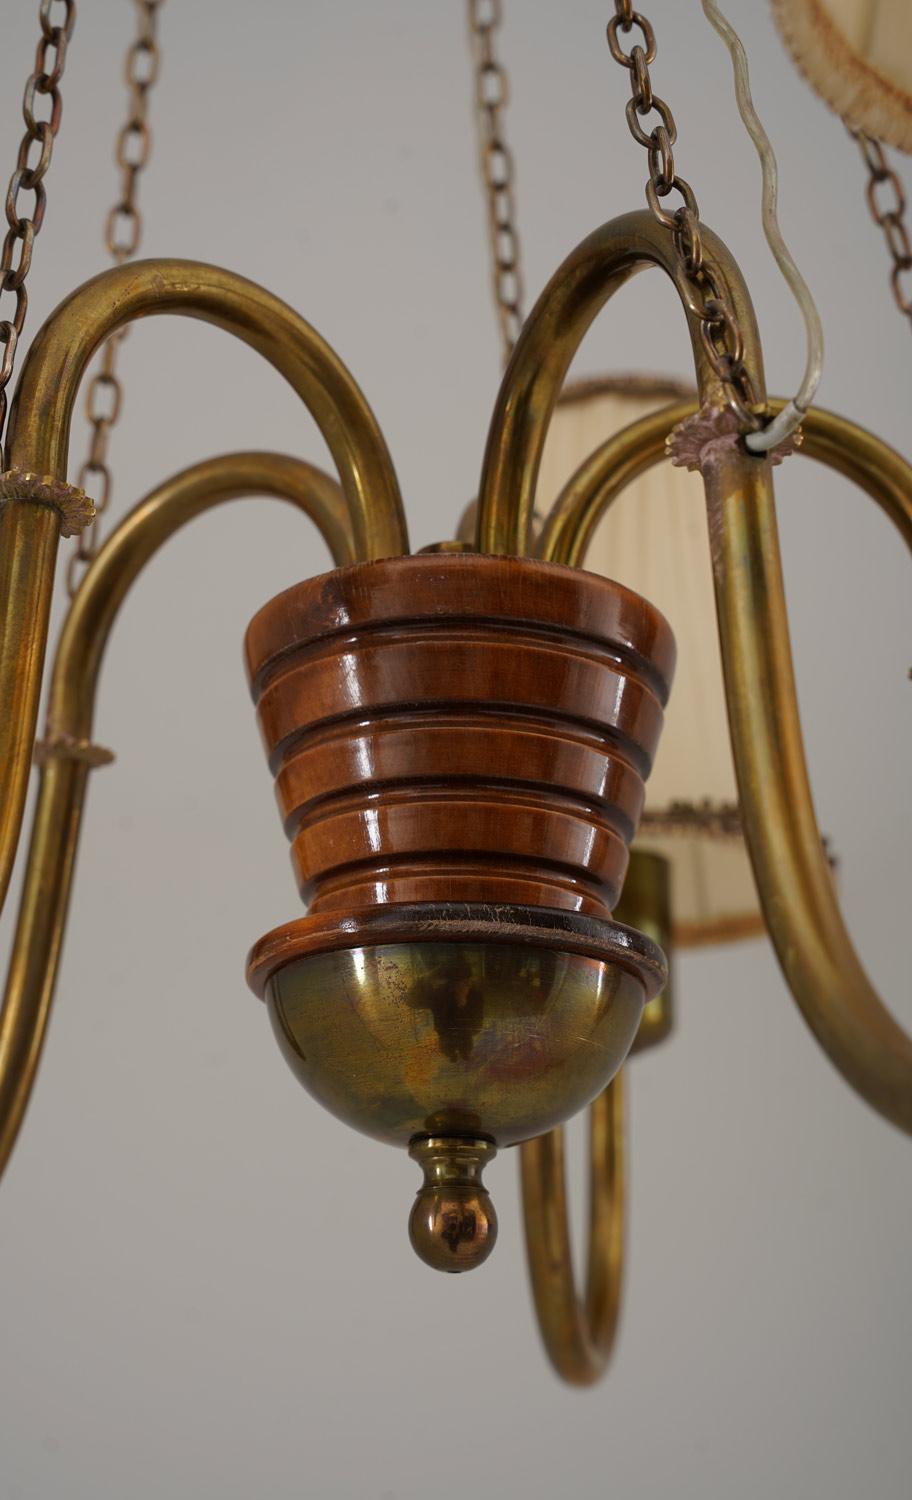 Swedish Modern Chandelier in Brass and Wood, 1940s For Sale 1